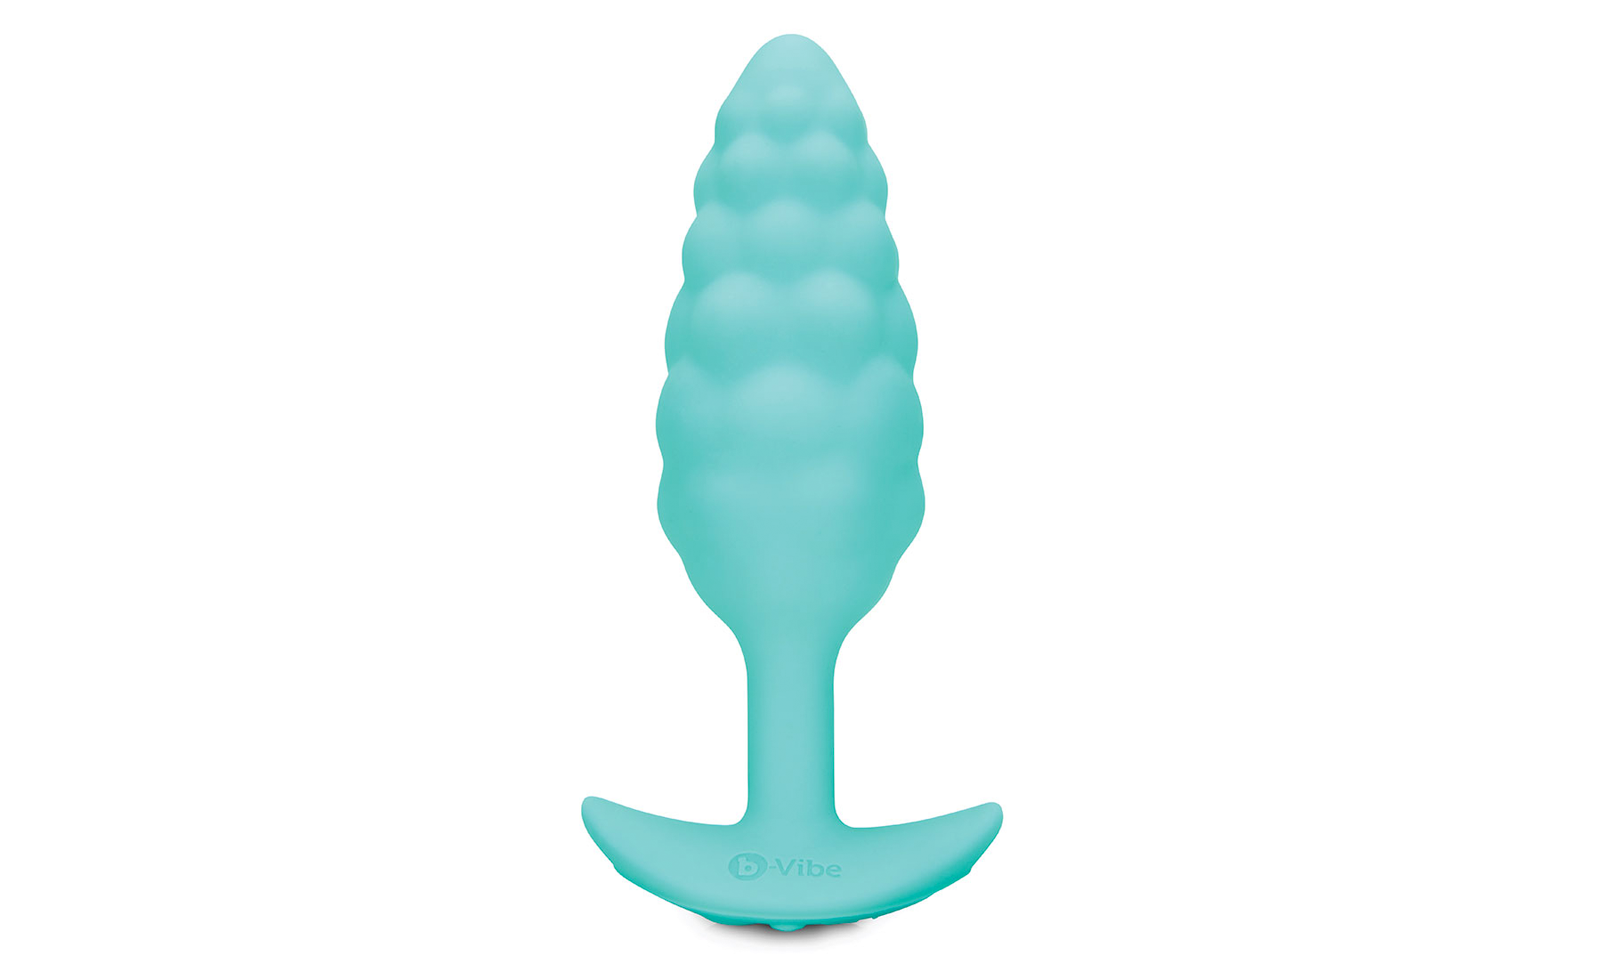 Entrenue Shipping b-Vibe Texture Plugs, Le Wand Corded Wand